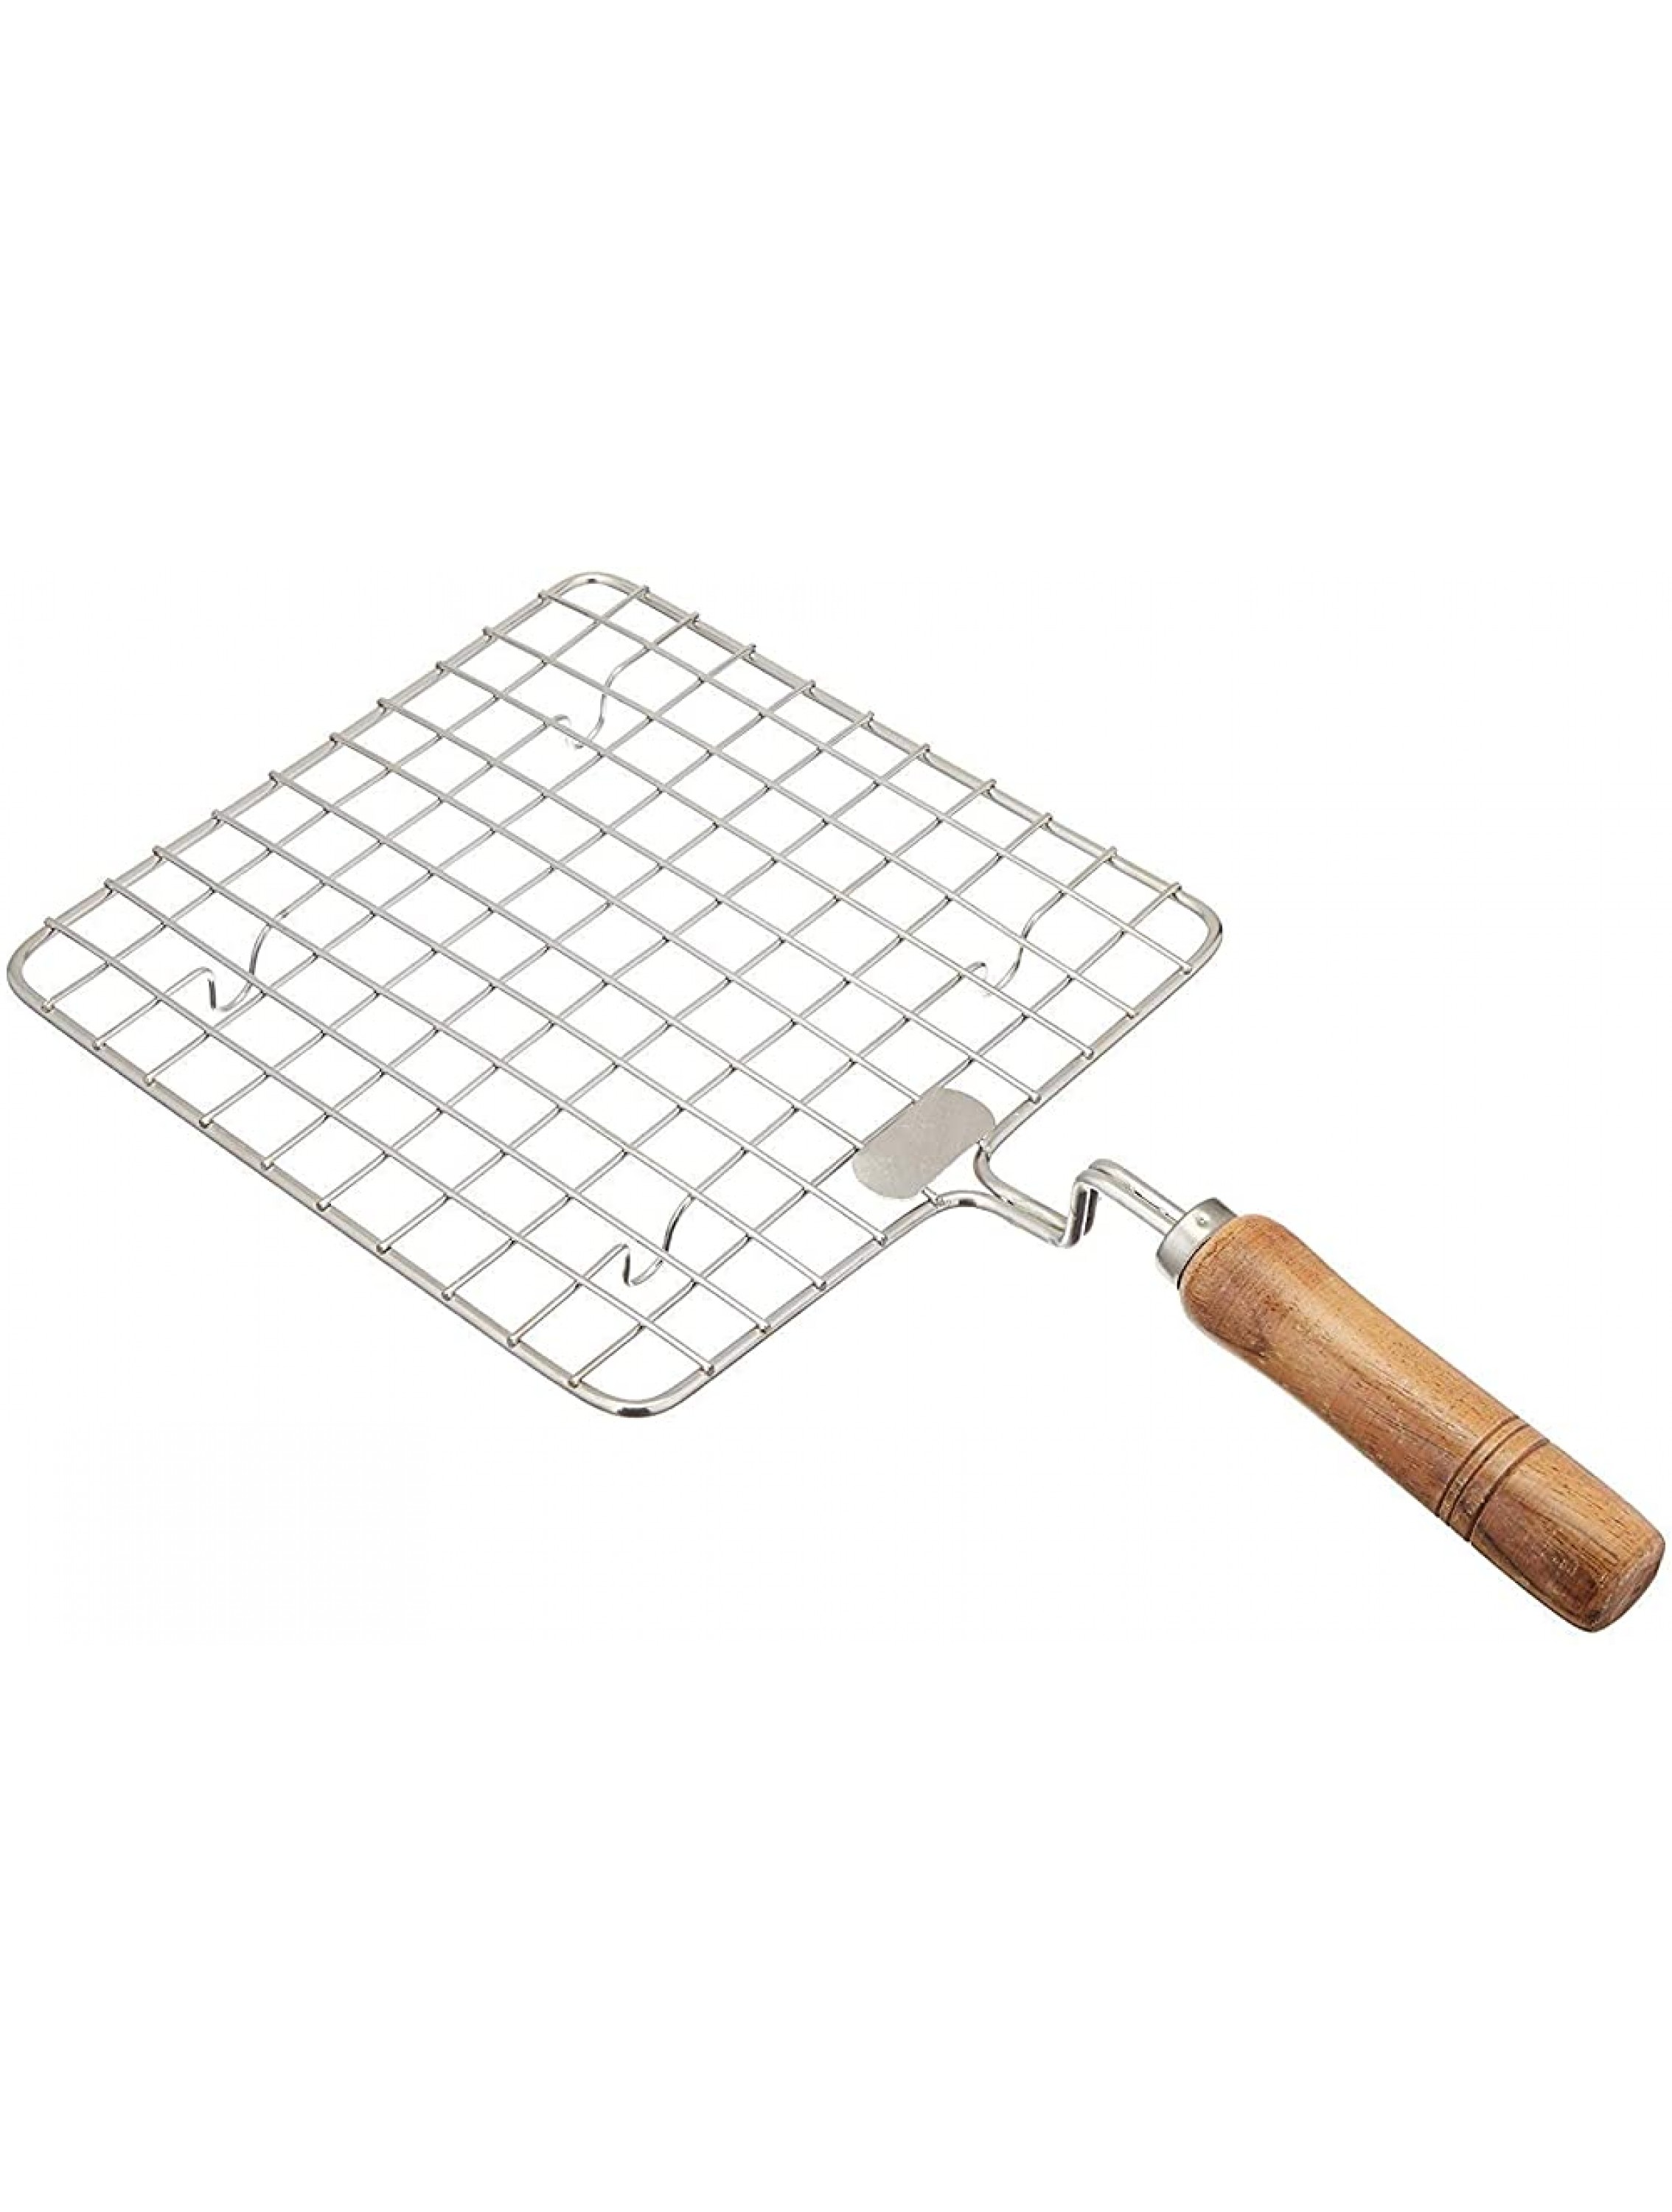 Stainless Steel Wire Roaster Papad Jali Wooden Handle Square with Roasting Net,Papad Jali,Roti Jali,Roaster Stainless Steel Square Roti Grill - BGN9EPJB3